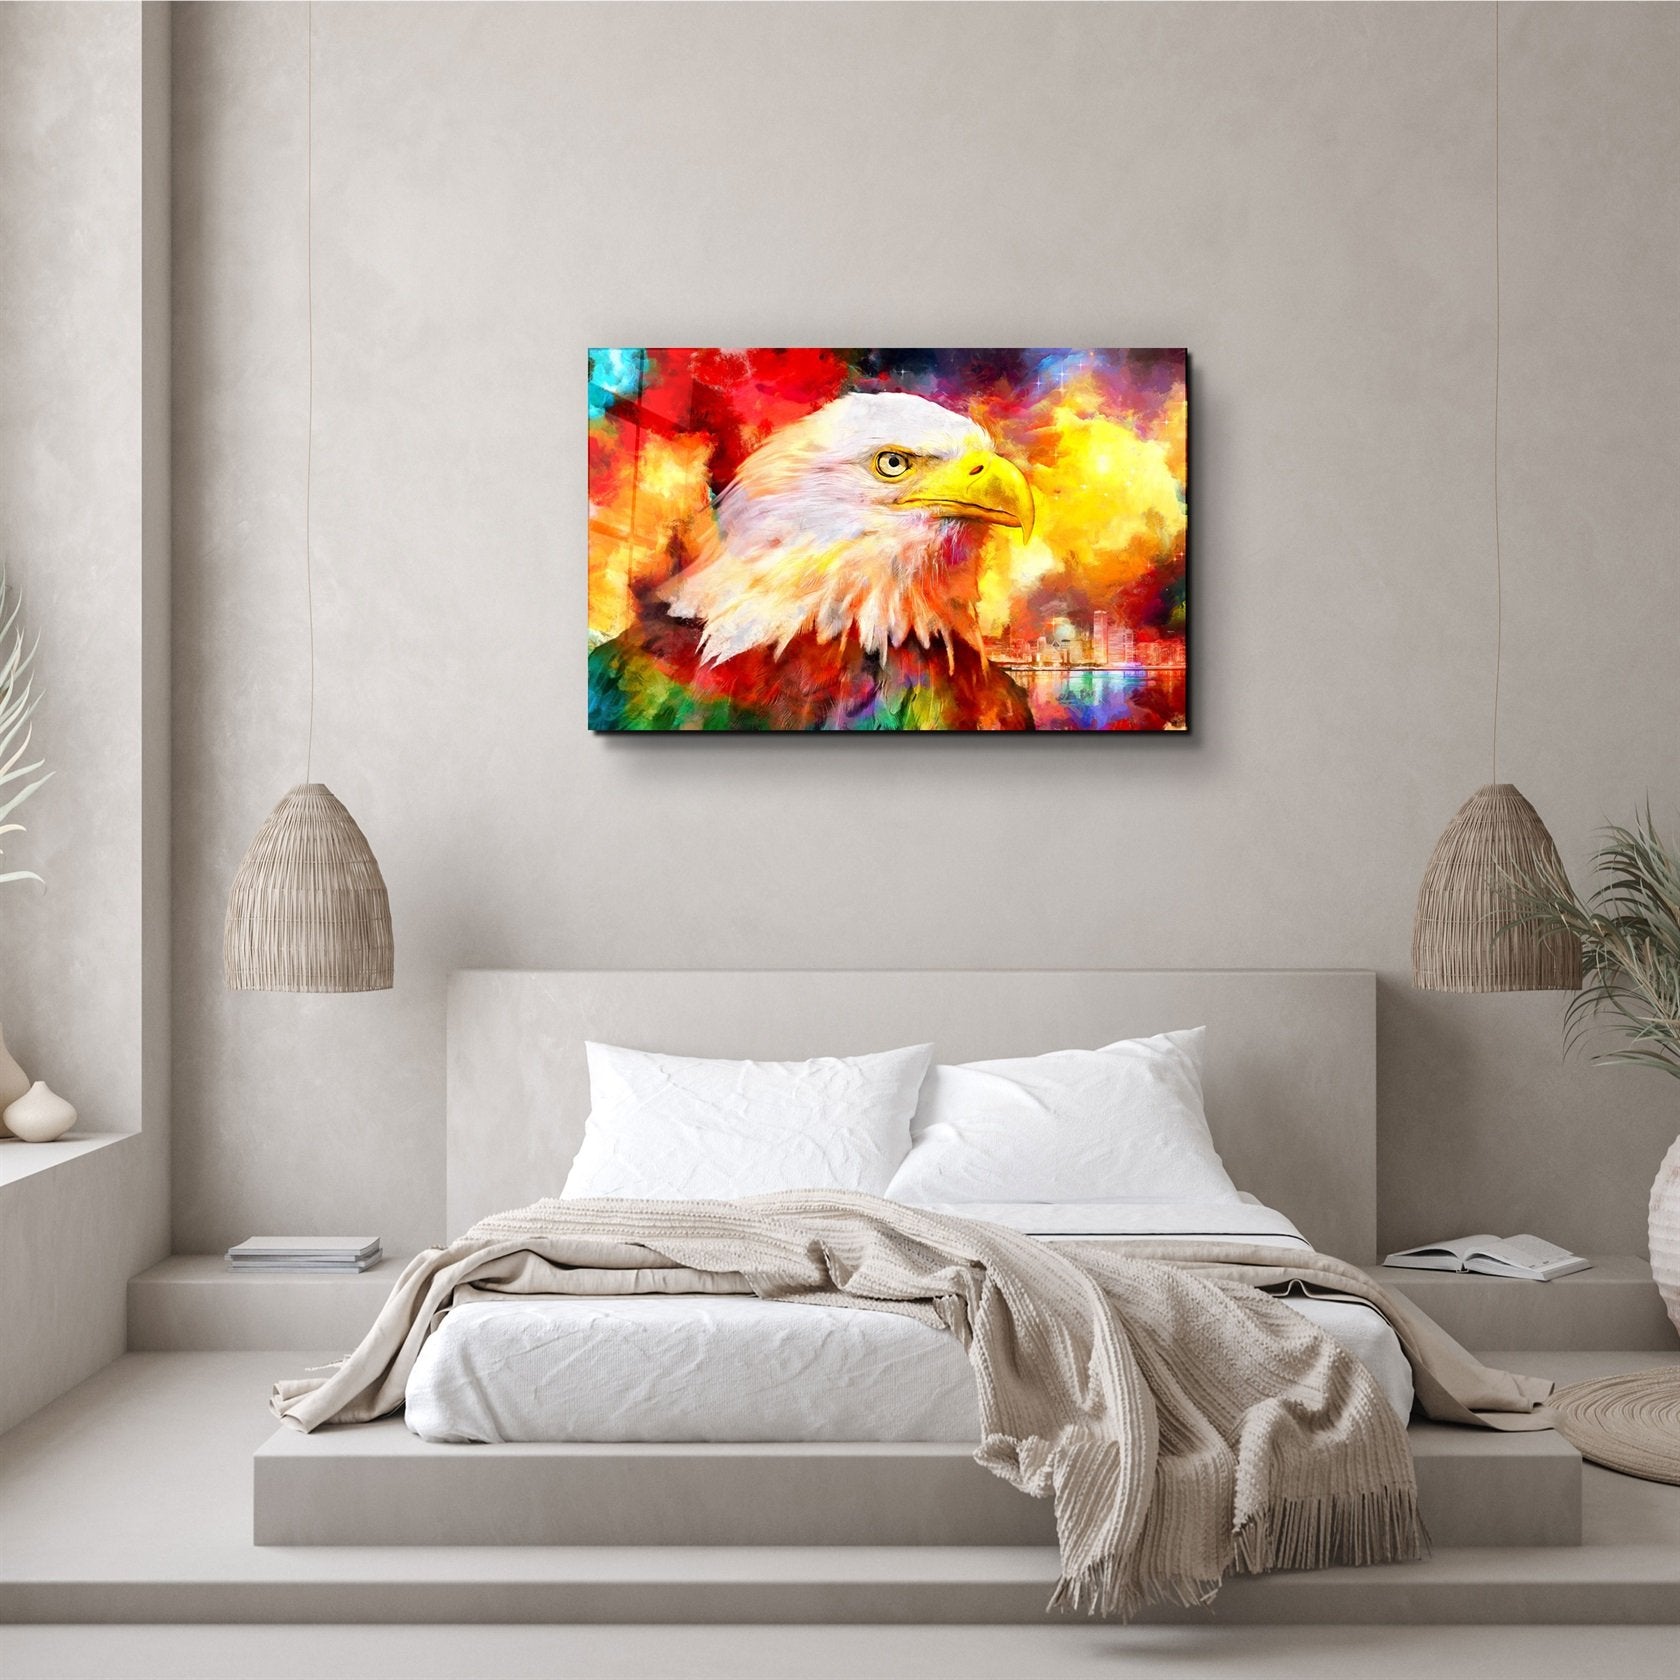 ・"Abstract Colorful Eagle"・Glass Wall Art